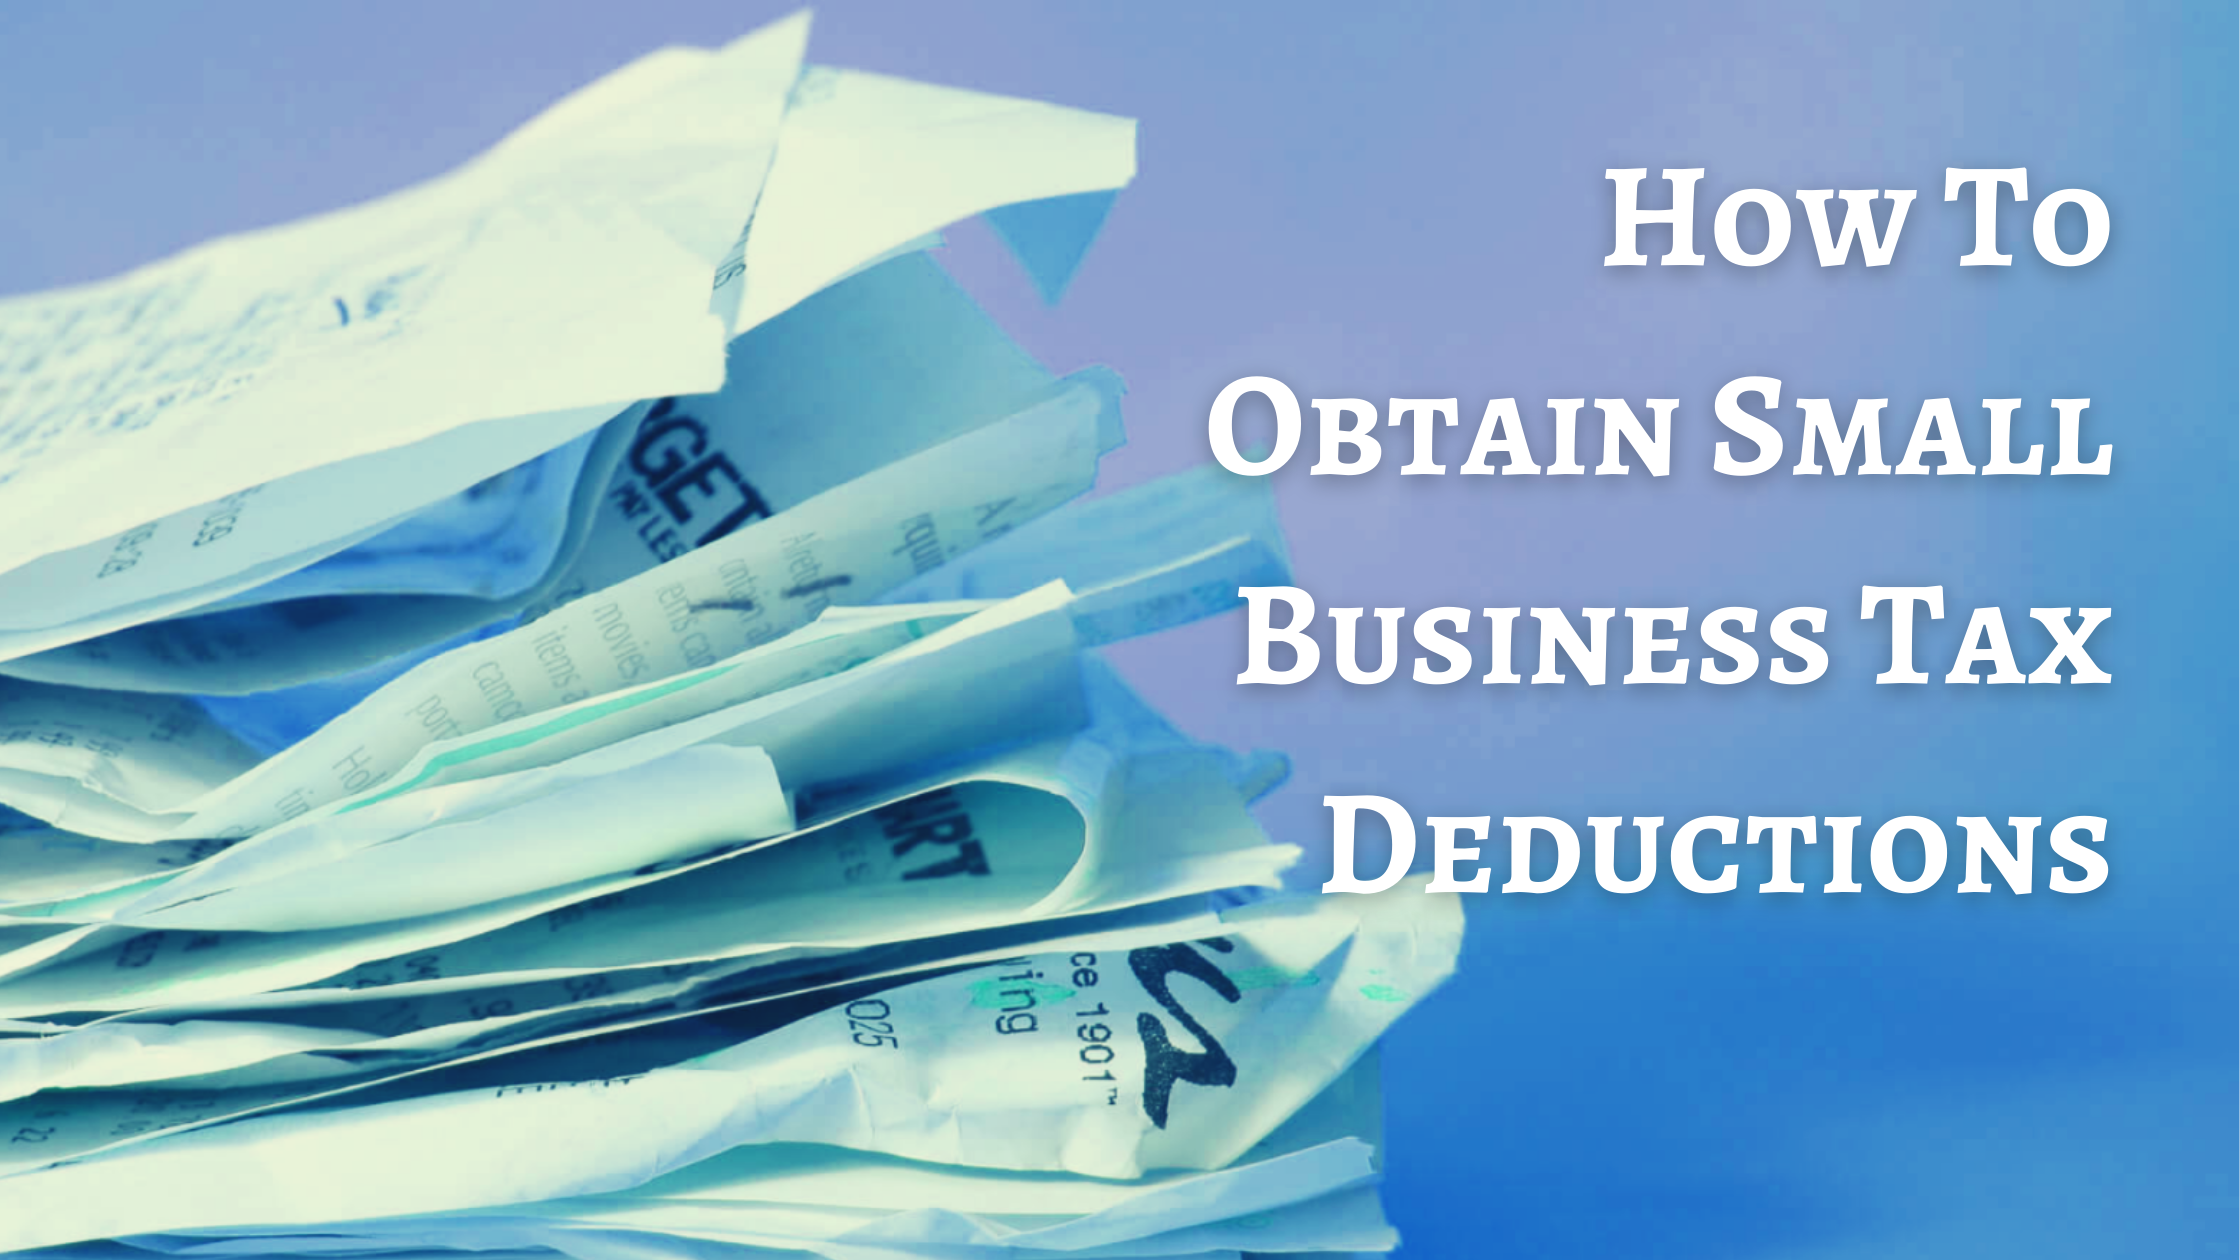 How To Obtain Small Business Tax Deductions